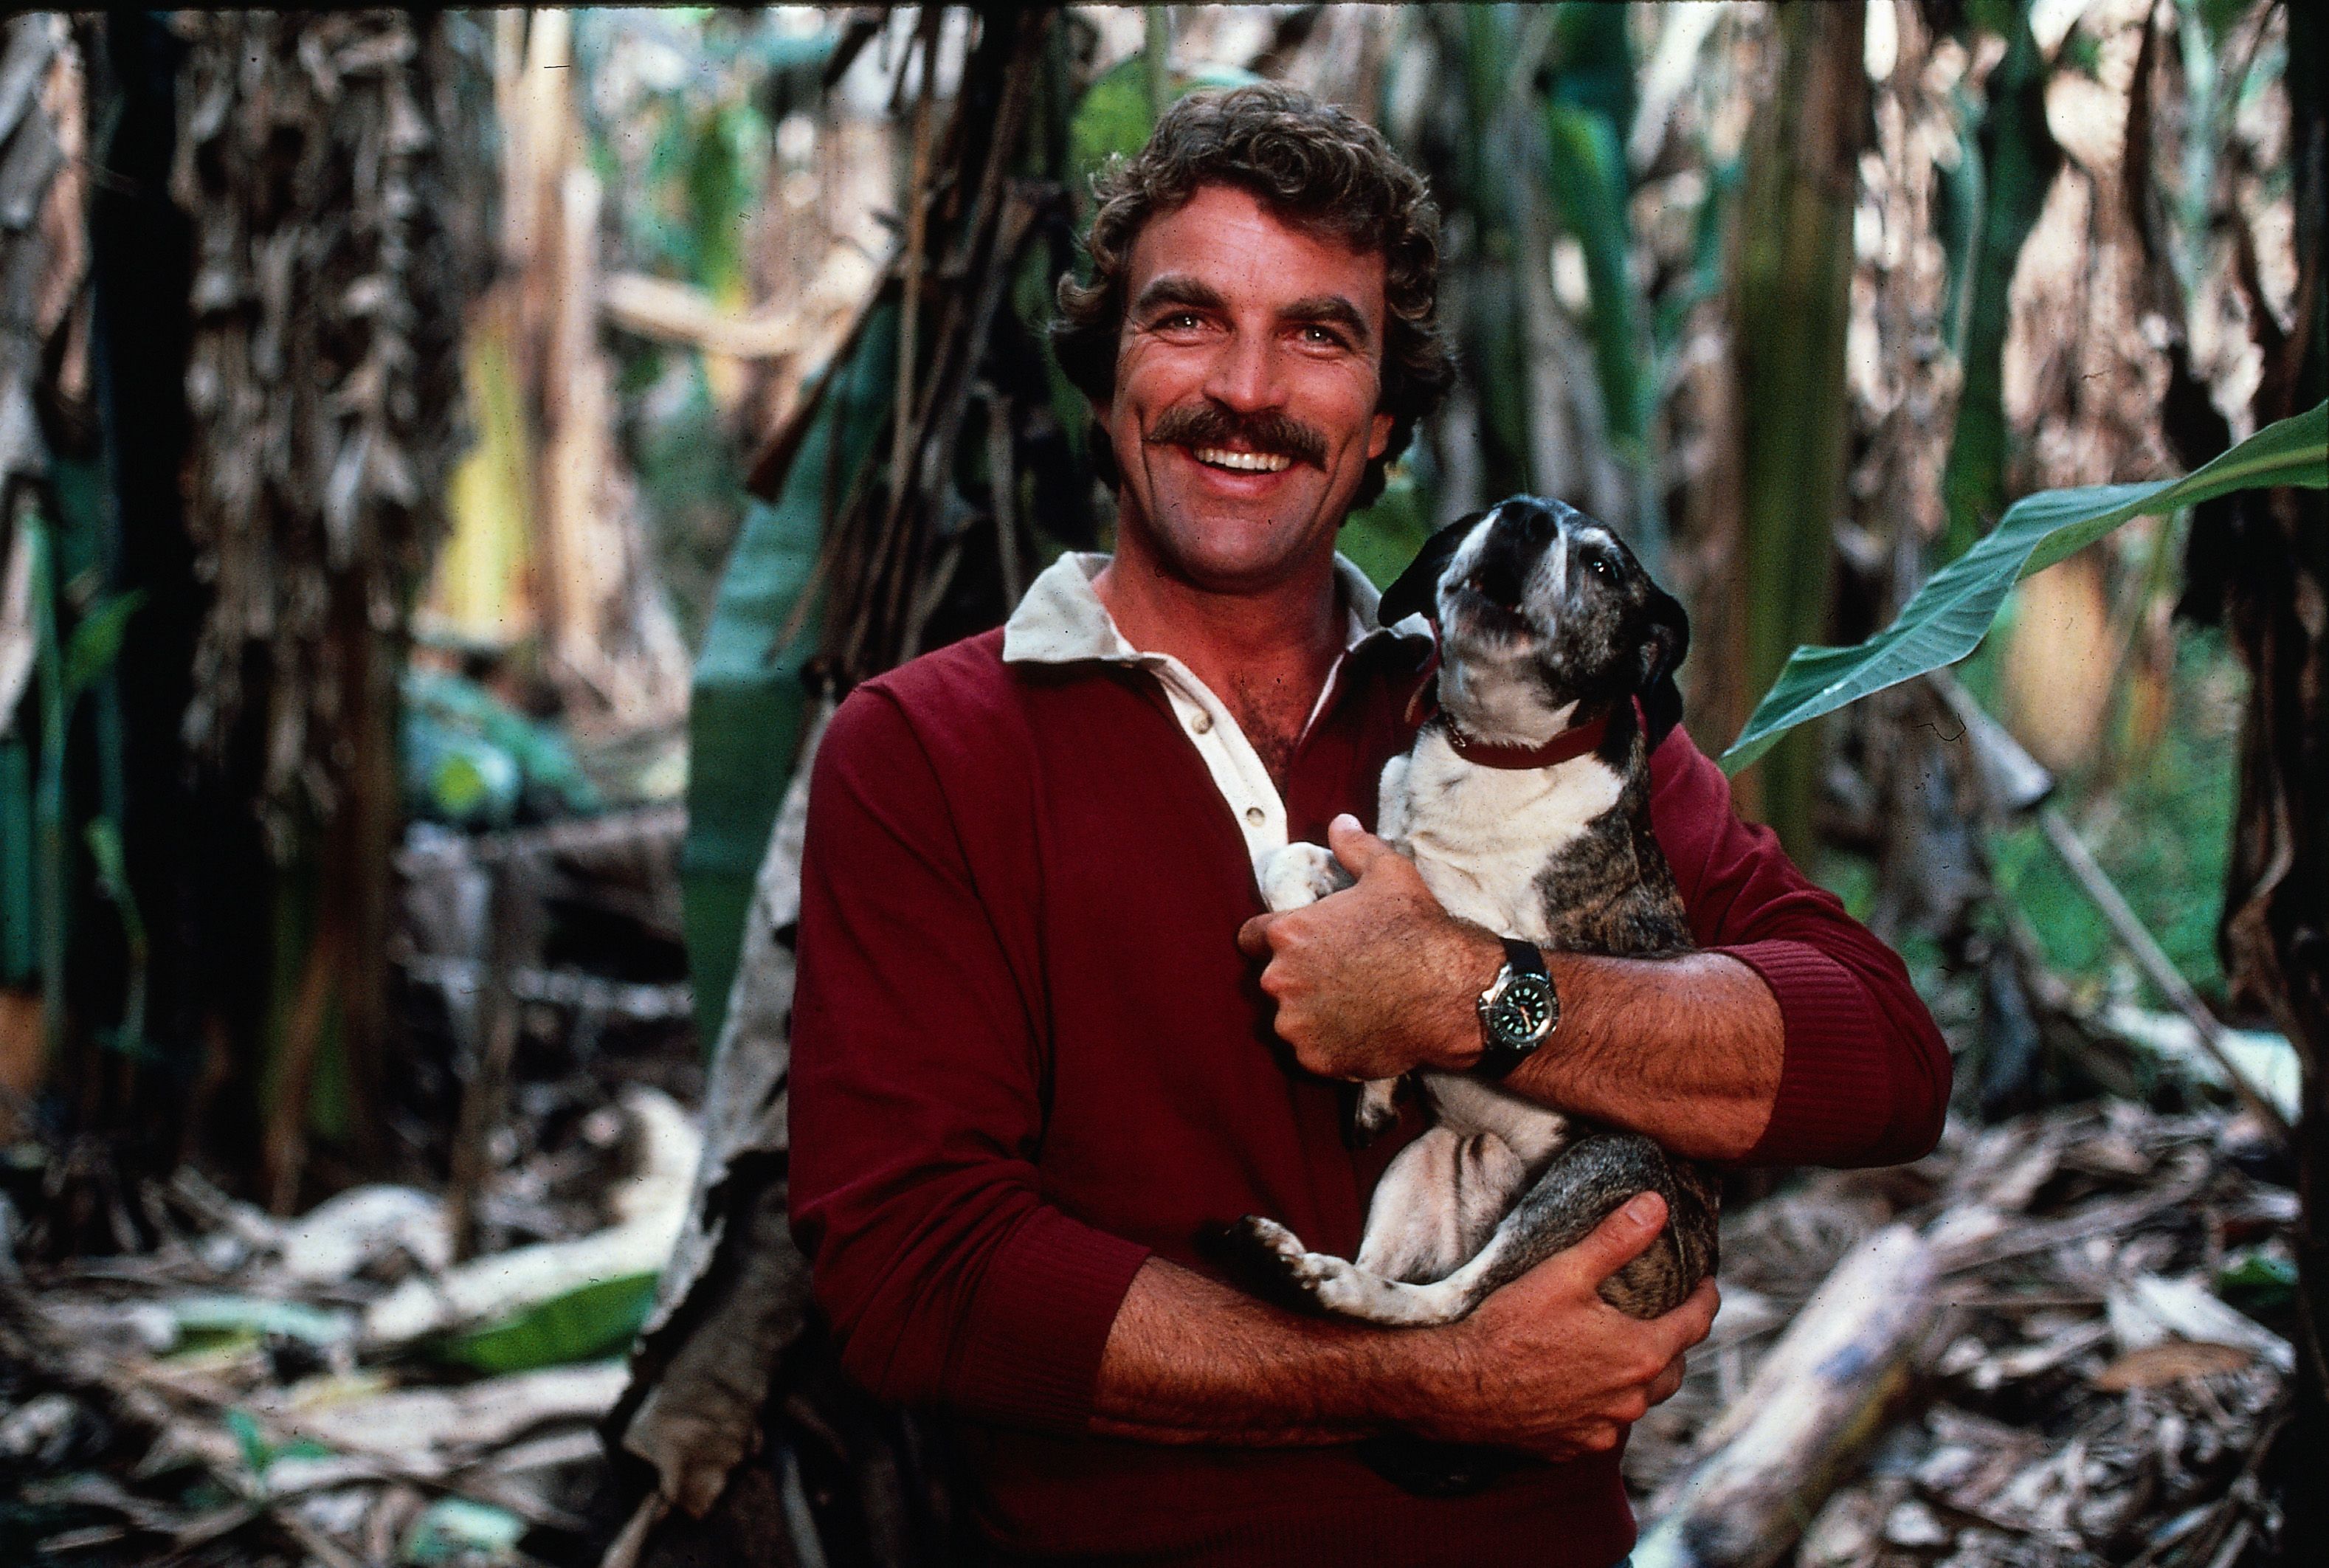 Tom Selleck, star of the CBS detective drama 'Magnum, P.I.'poses in a tropical woodland, Hawaii, 1983 | Source: Getty Images